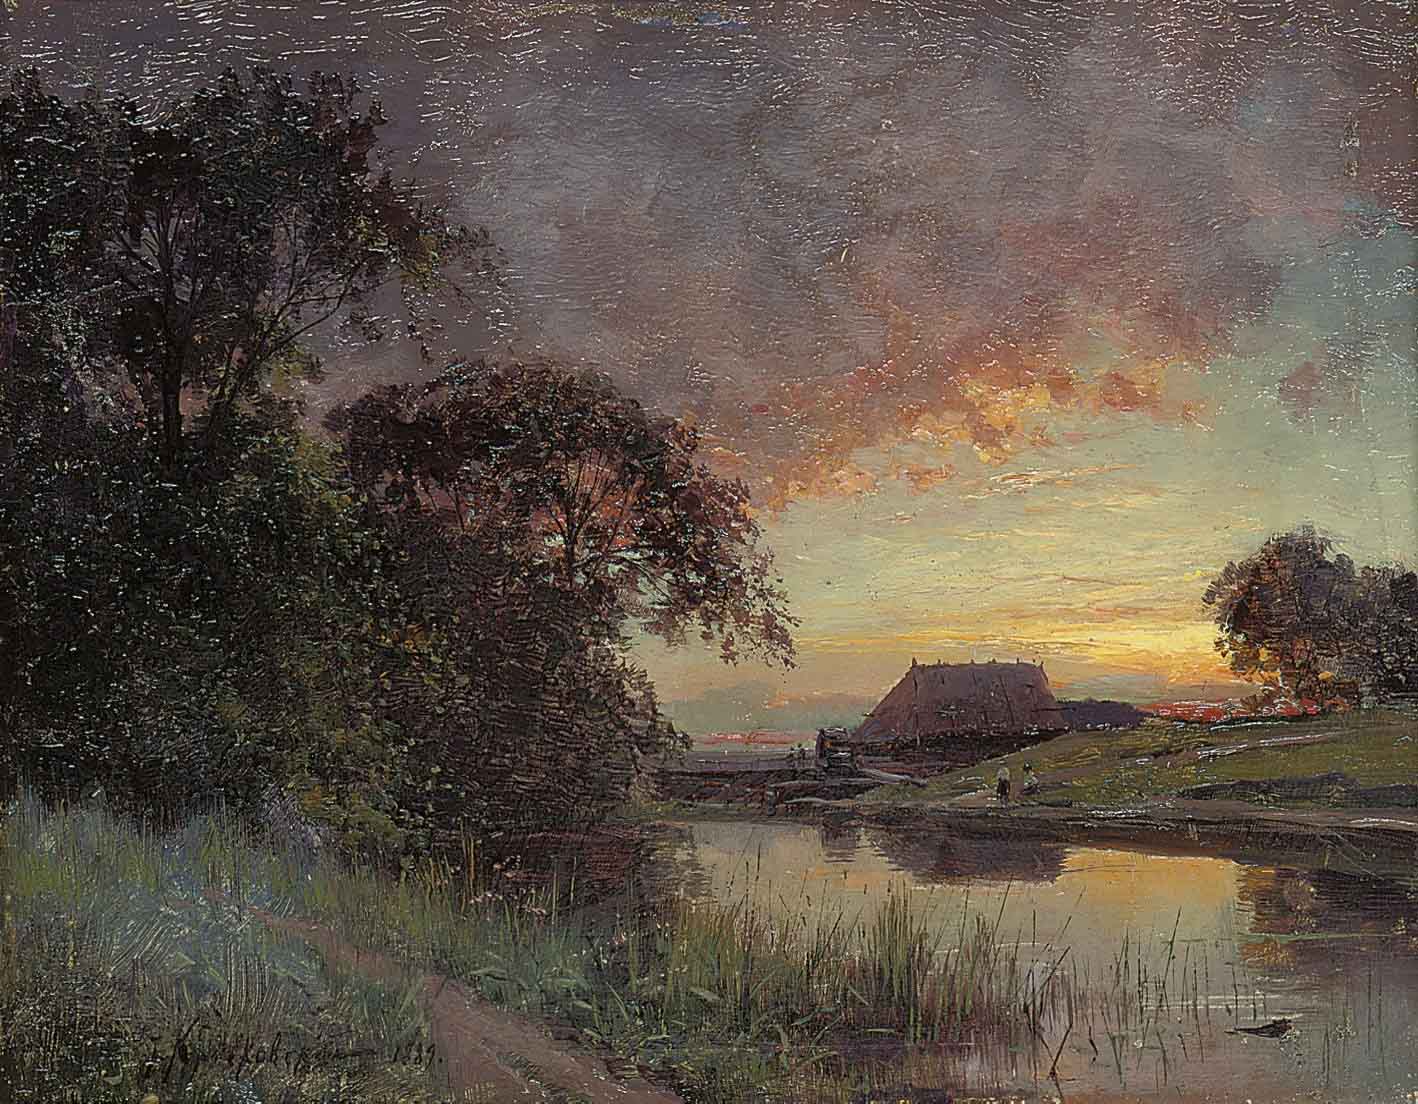 Dusk on the river